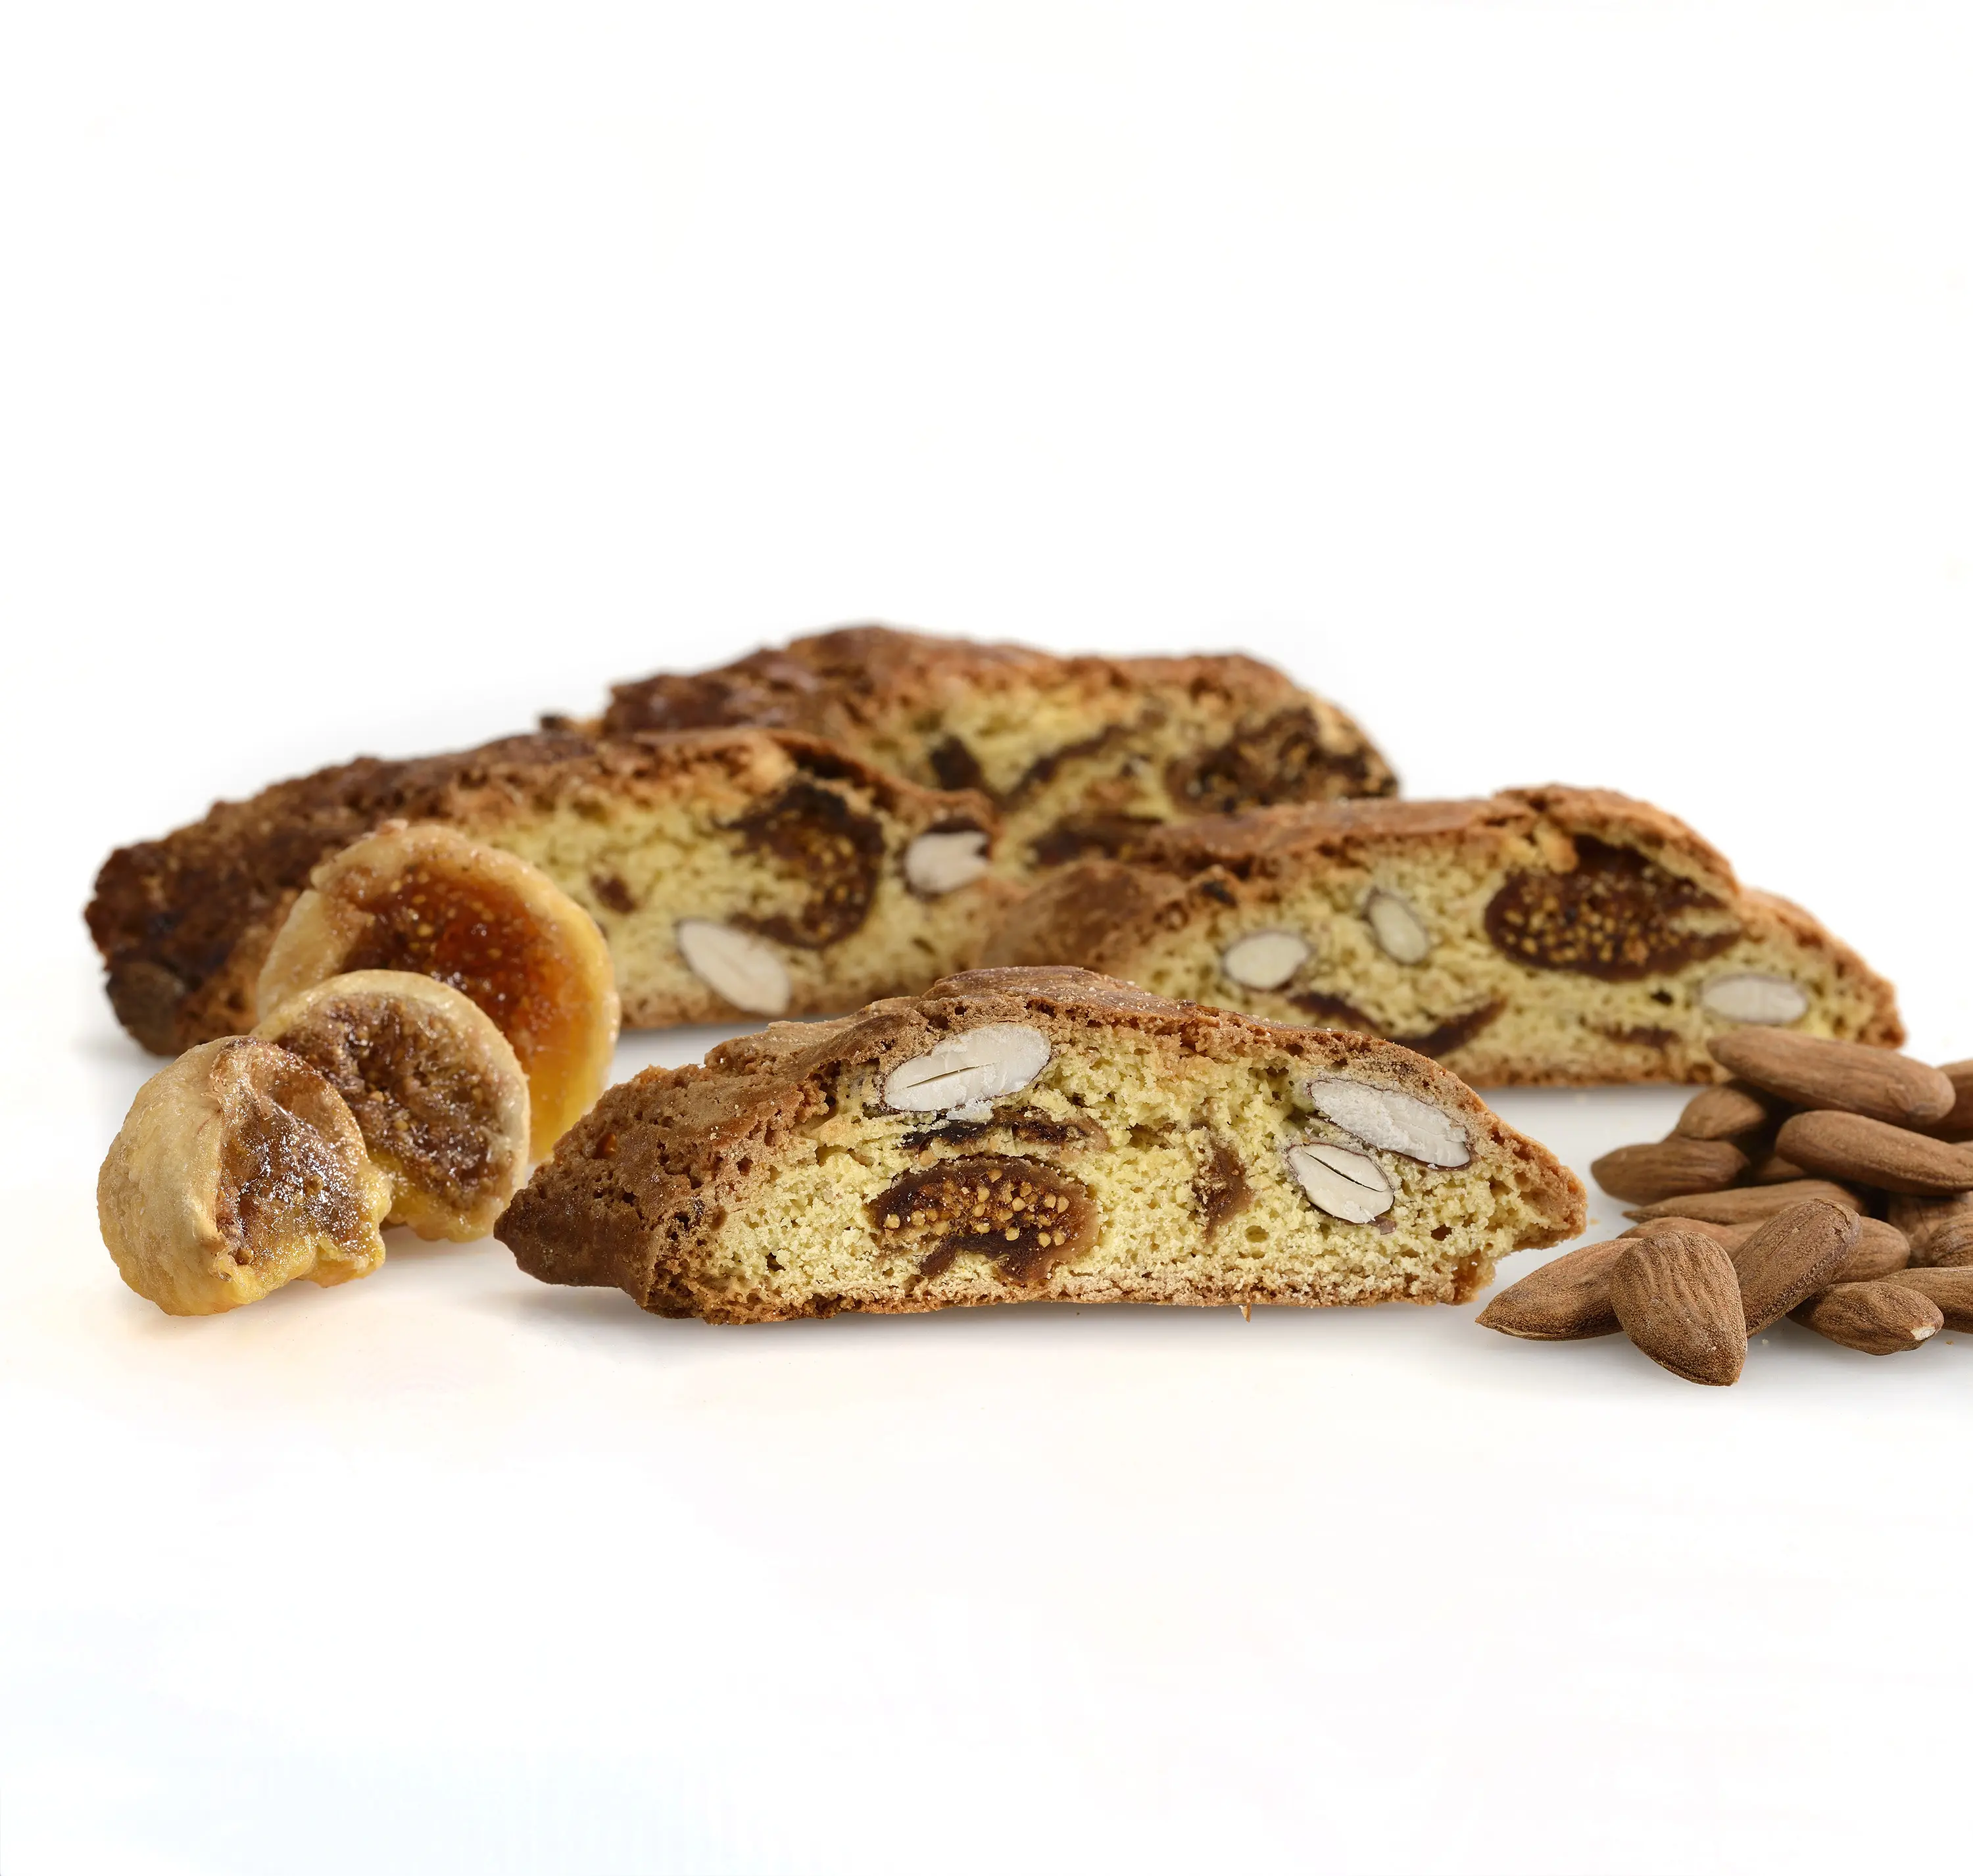 High quality handmade Italian biscuits - sweet hard texture - Cantucci with figs and almonds 200g bag